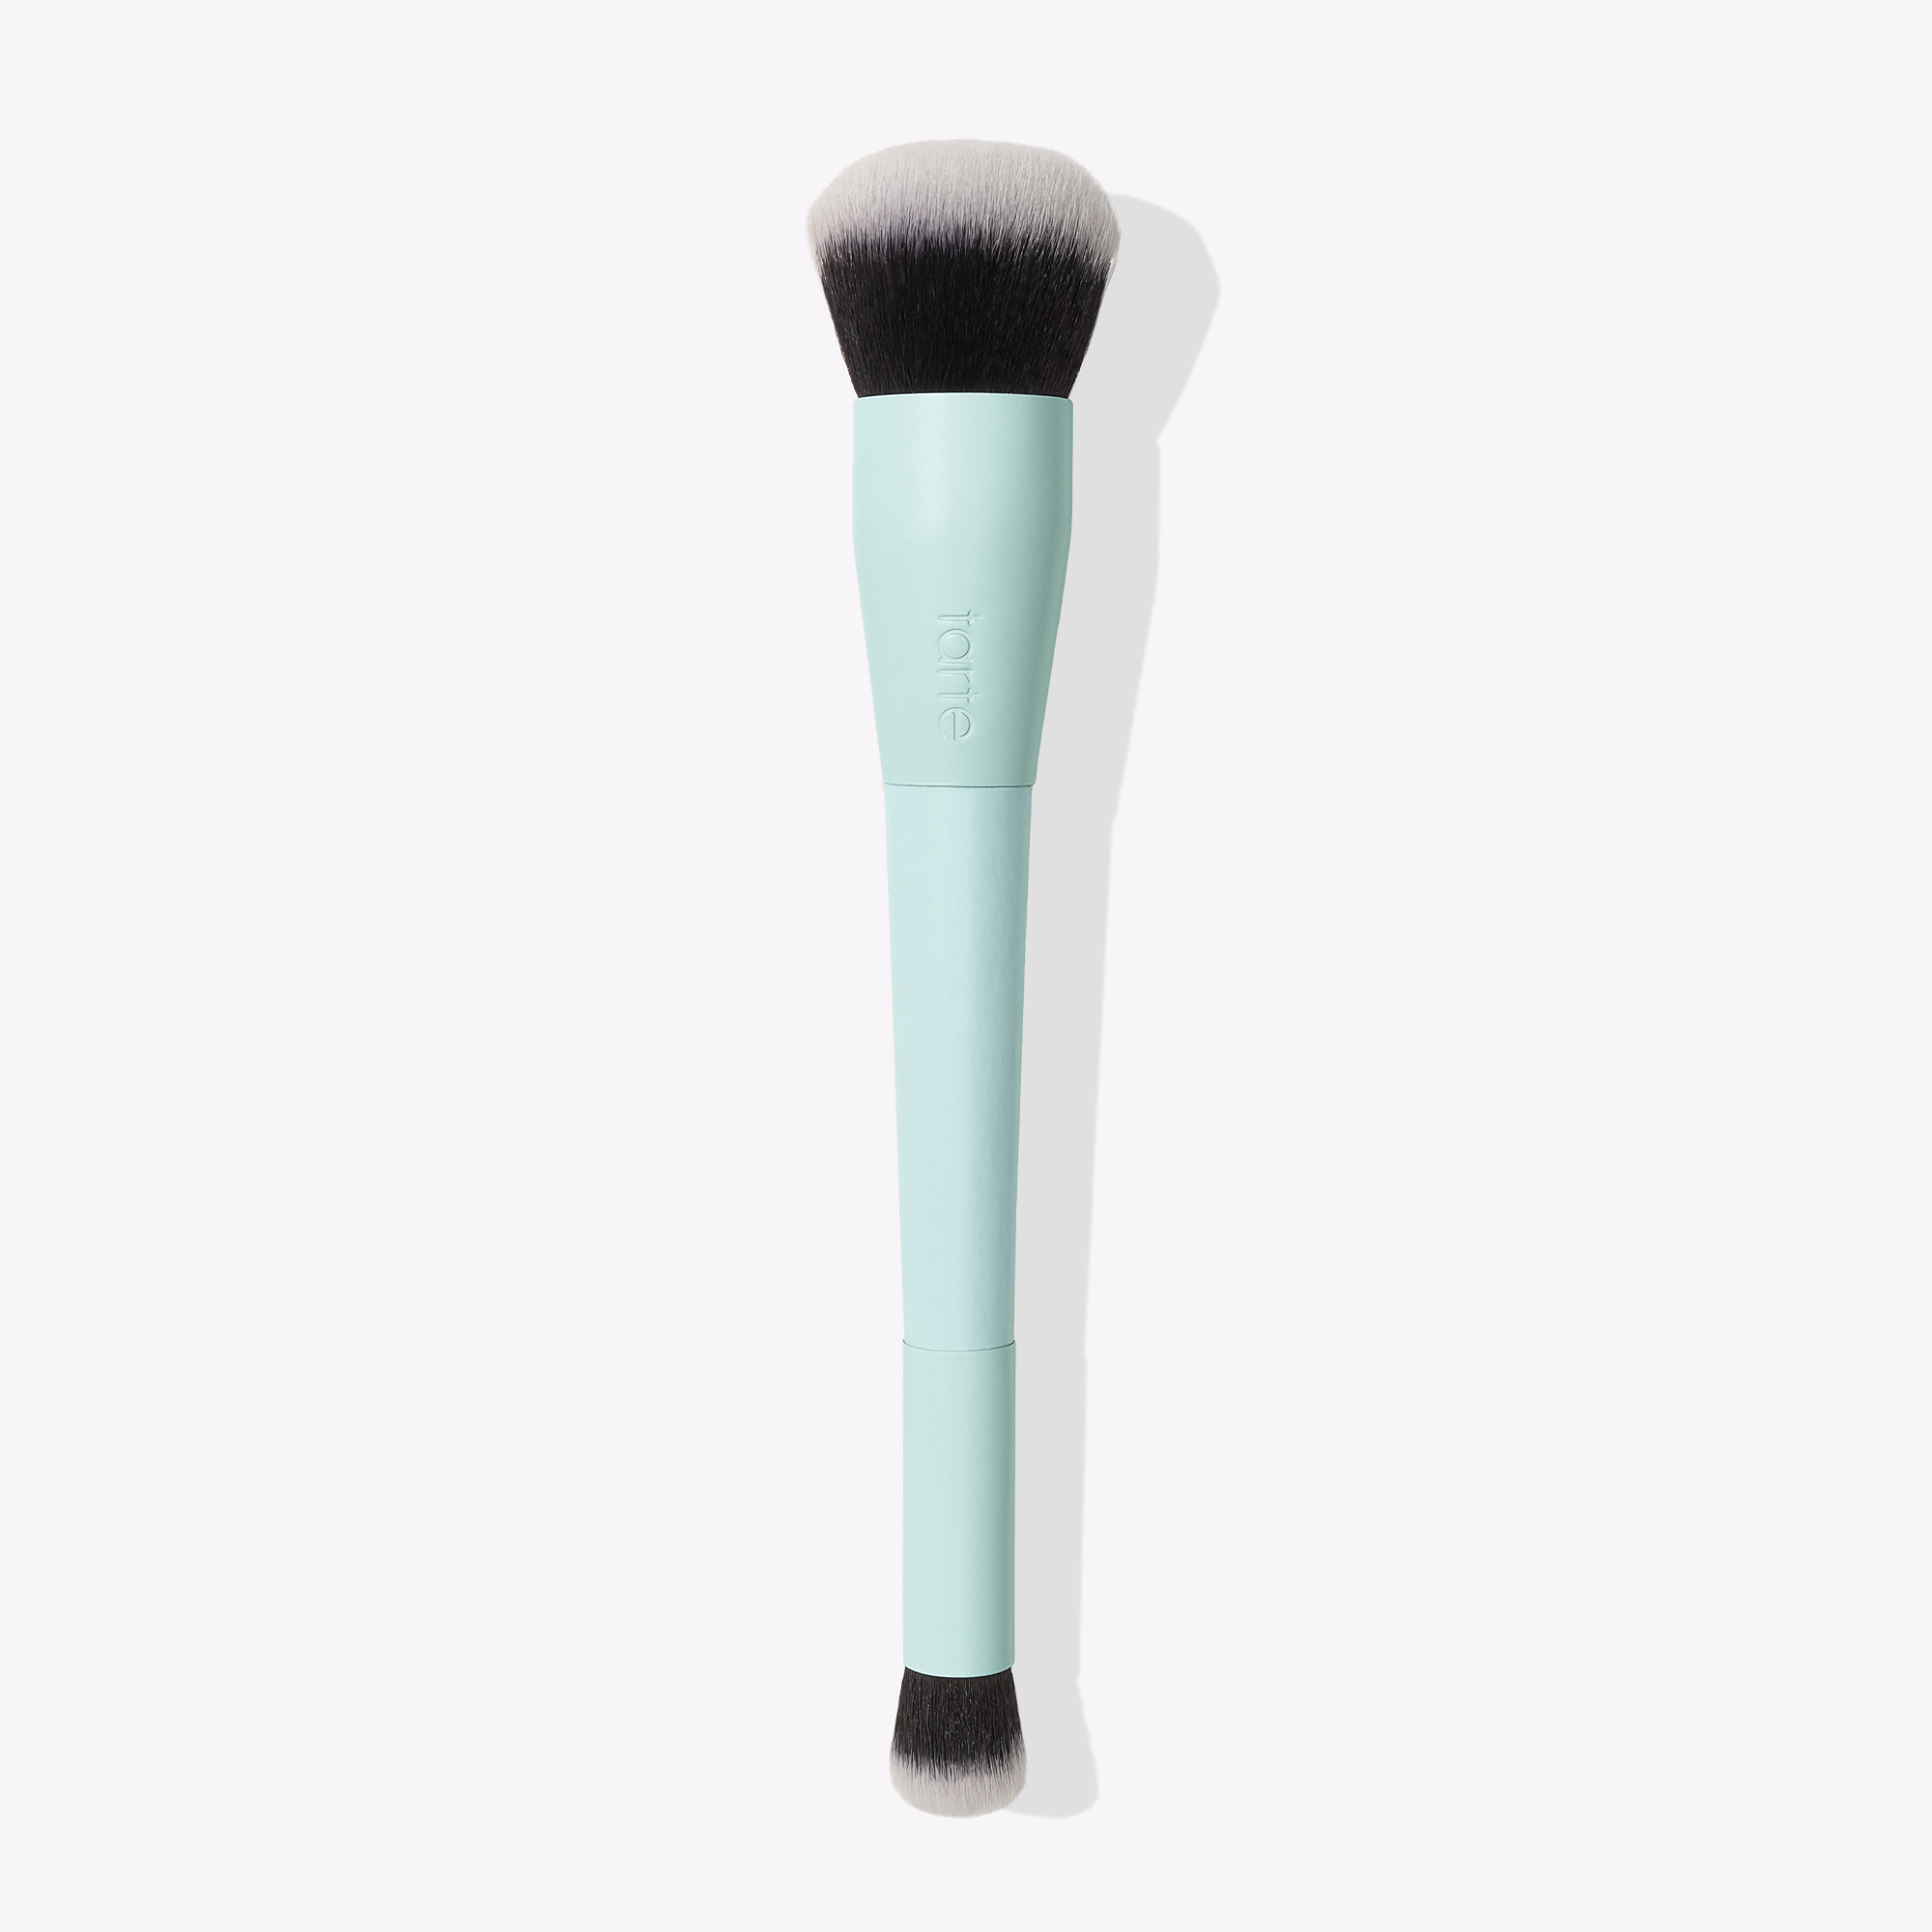 Tarte Cosmetics Hydro-smoother Double-ended Brush In White